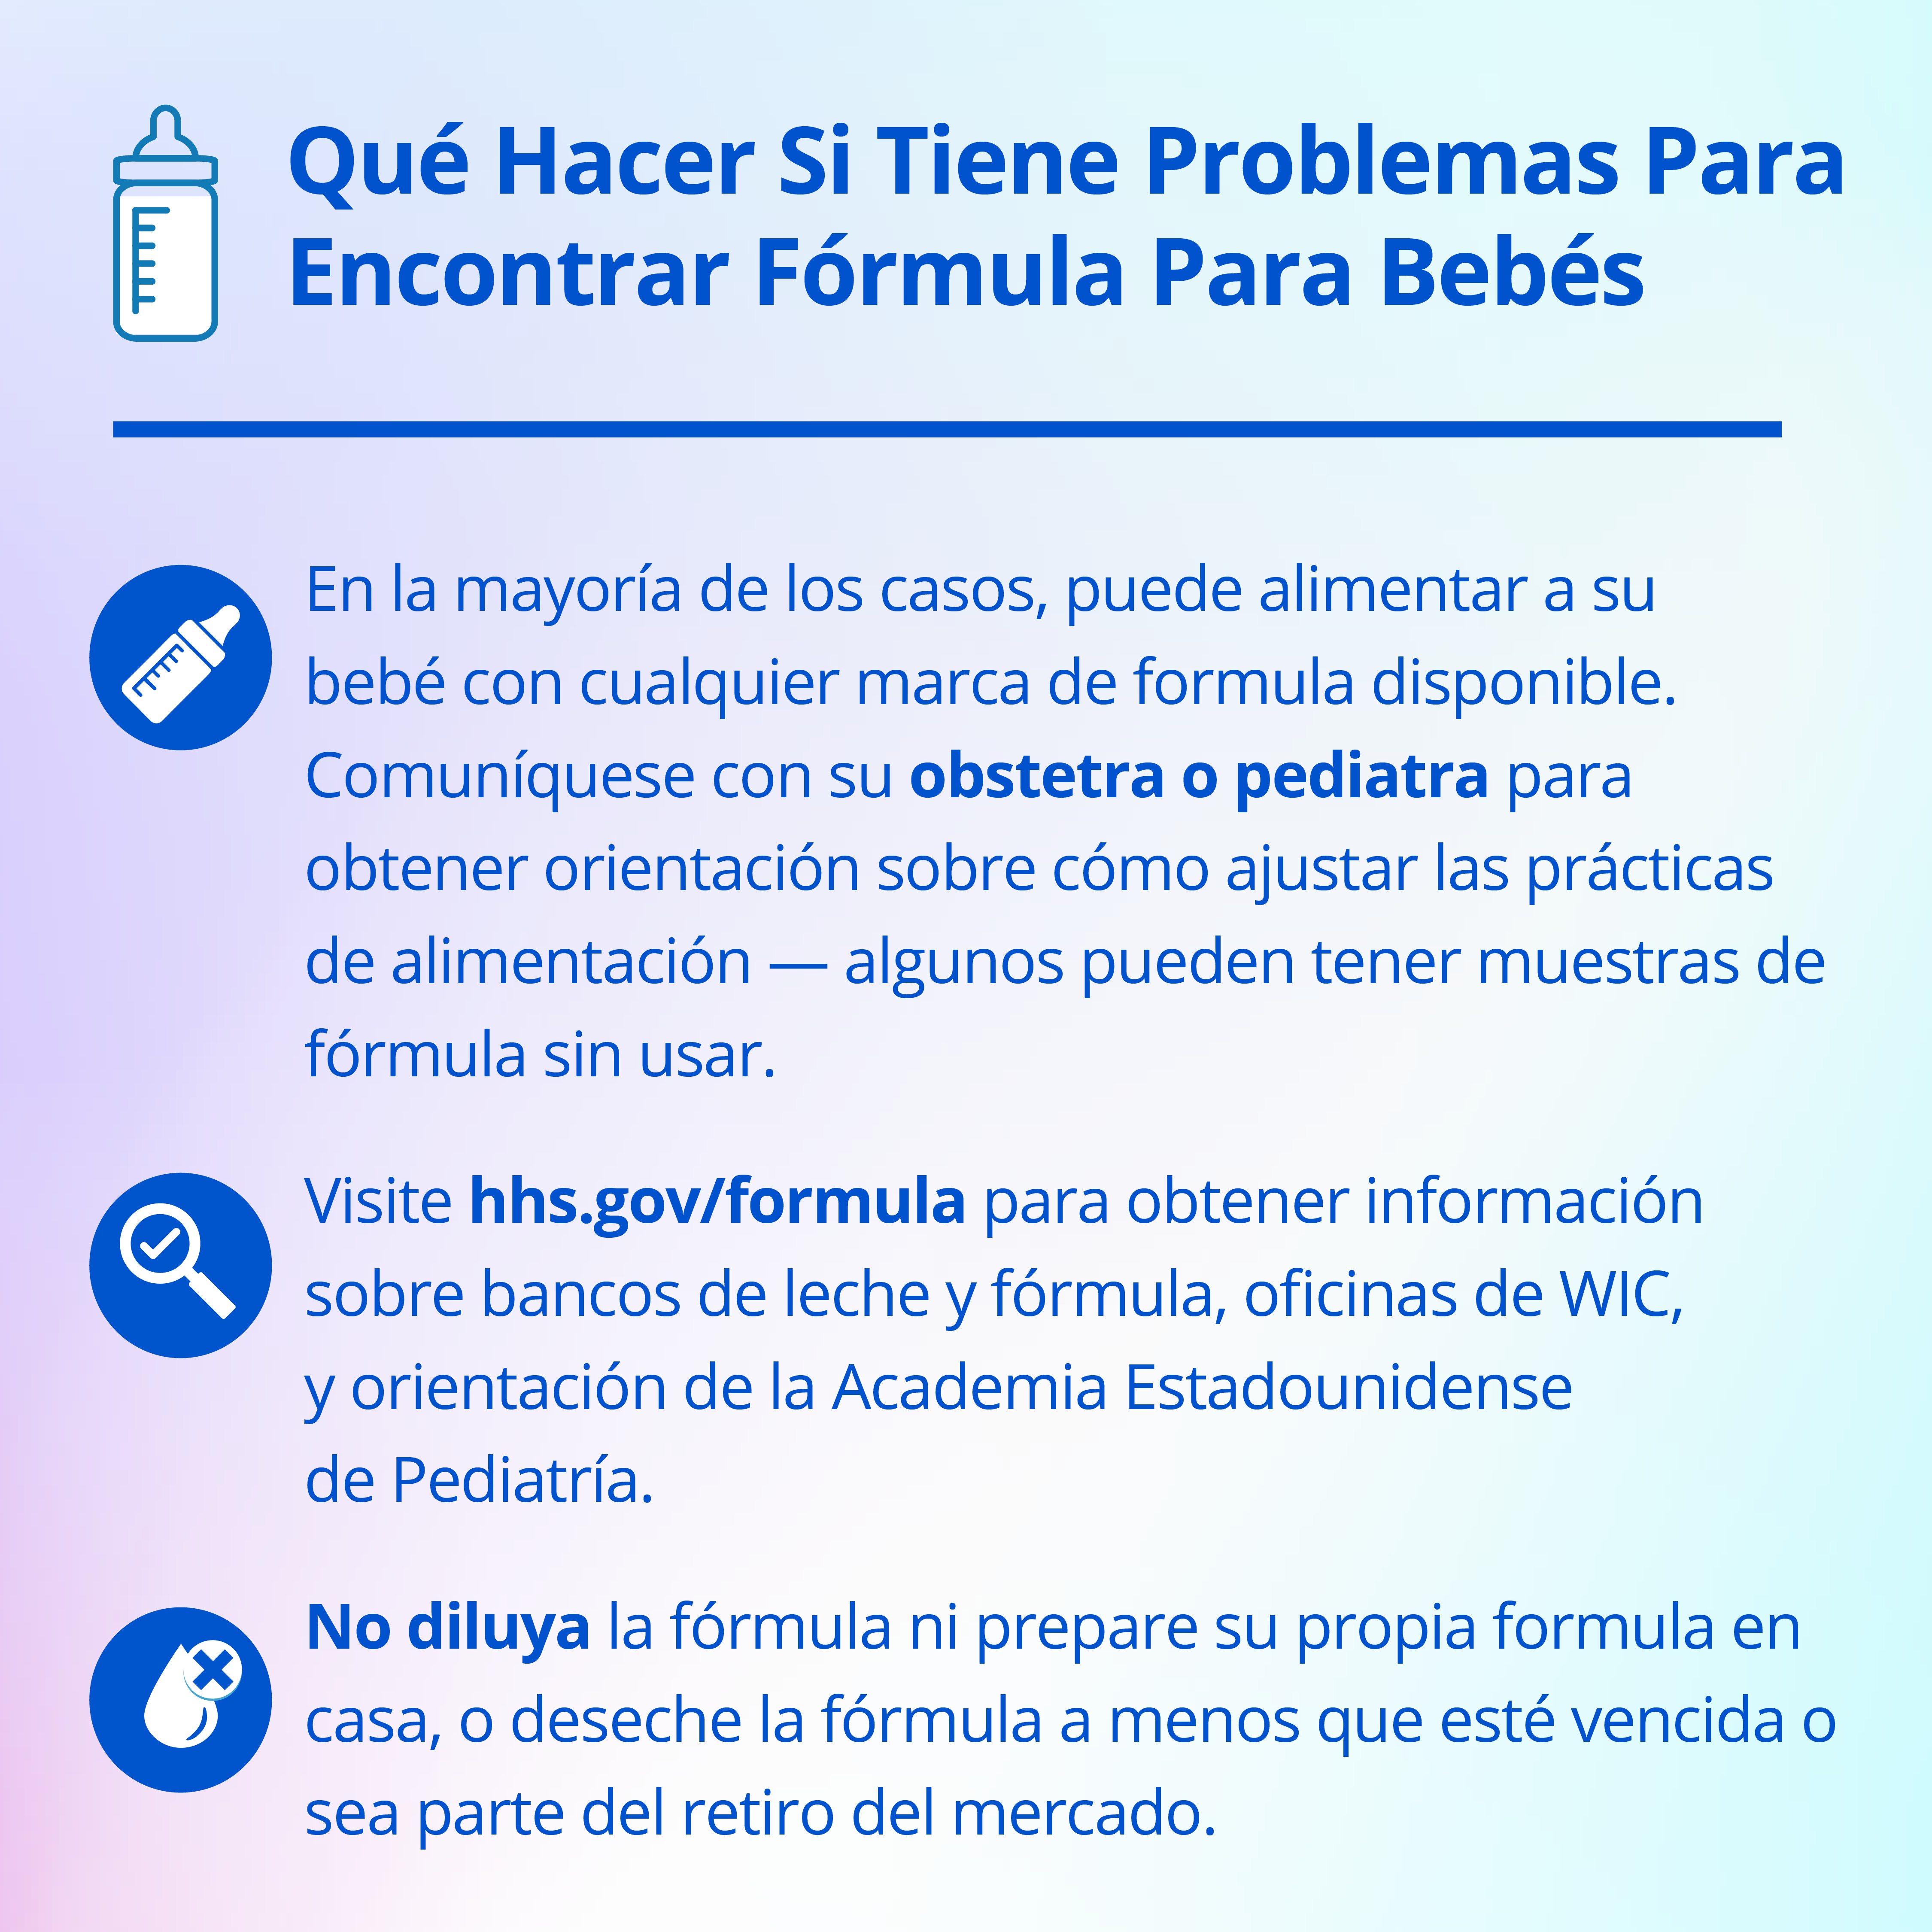 Instagram graphic explaining in Spanish what to do if you're having trouble finding baby formula. In most cases, you can feed you baby any brand of formula that is available. Contact your OB/GYN or pediatrician for guidance on adjusting feeding practices - some may have unused formula samples. Second, visit hhs.gov/formula for information on milk and formula banks, WIC offices, and guidance from the American Academy of Pediatrics. Third, do not water down formula, make formula at home, or discard formula unless it is expired or is part of the recall.